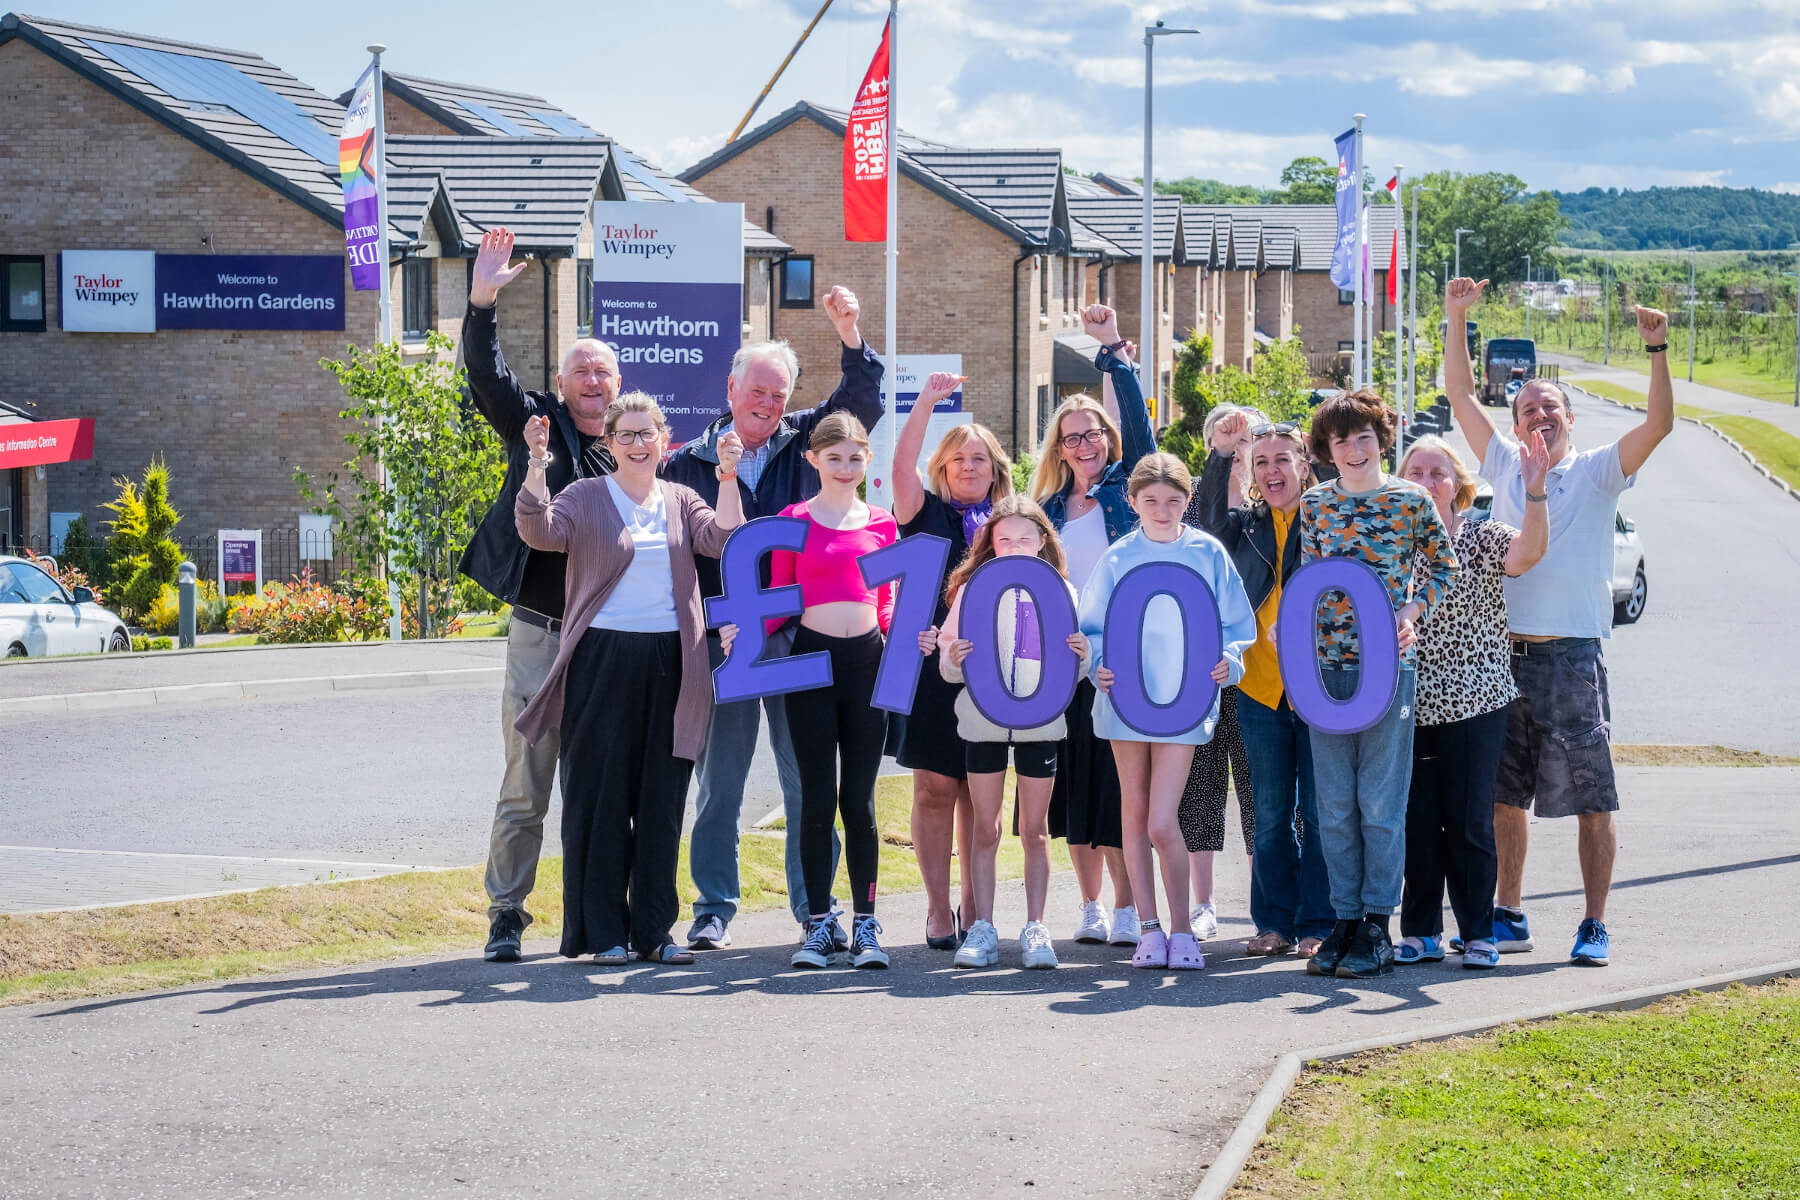 Representatives from Queensferry Community Association, City of Edinburgh Council Lifelong Learning Services, Queensferry & District Community Council join local Taylor Wimpey East Scotland sales executive Helen Allenby at Hawthorn Gardens in South Queensferry.  They are also joined by some of the young people hoping to take part in the Summer Fun Programme.